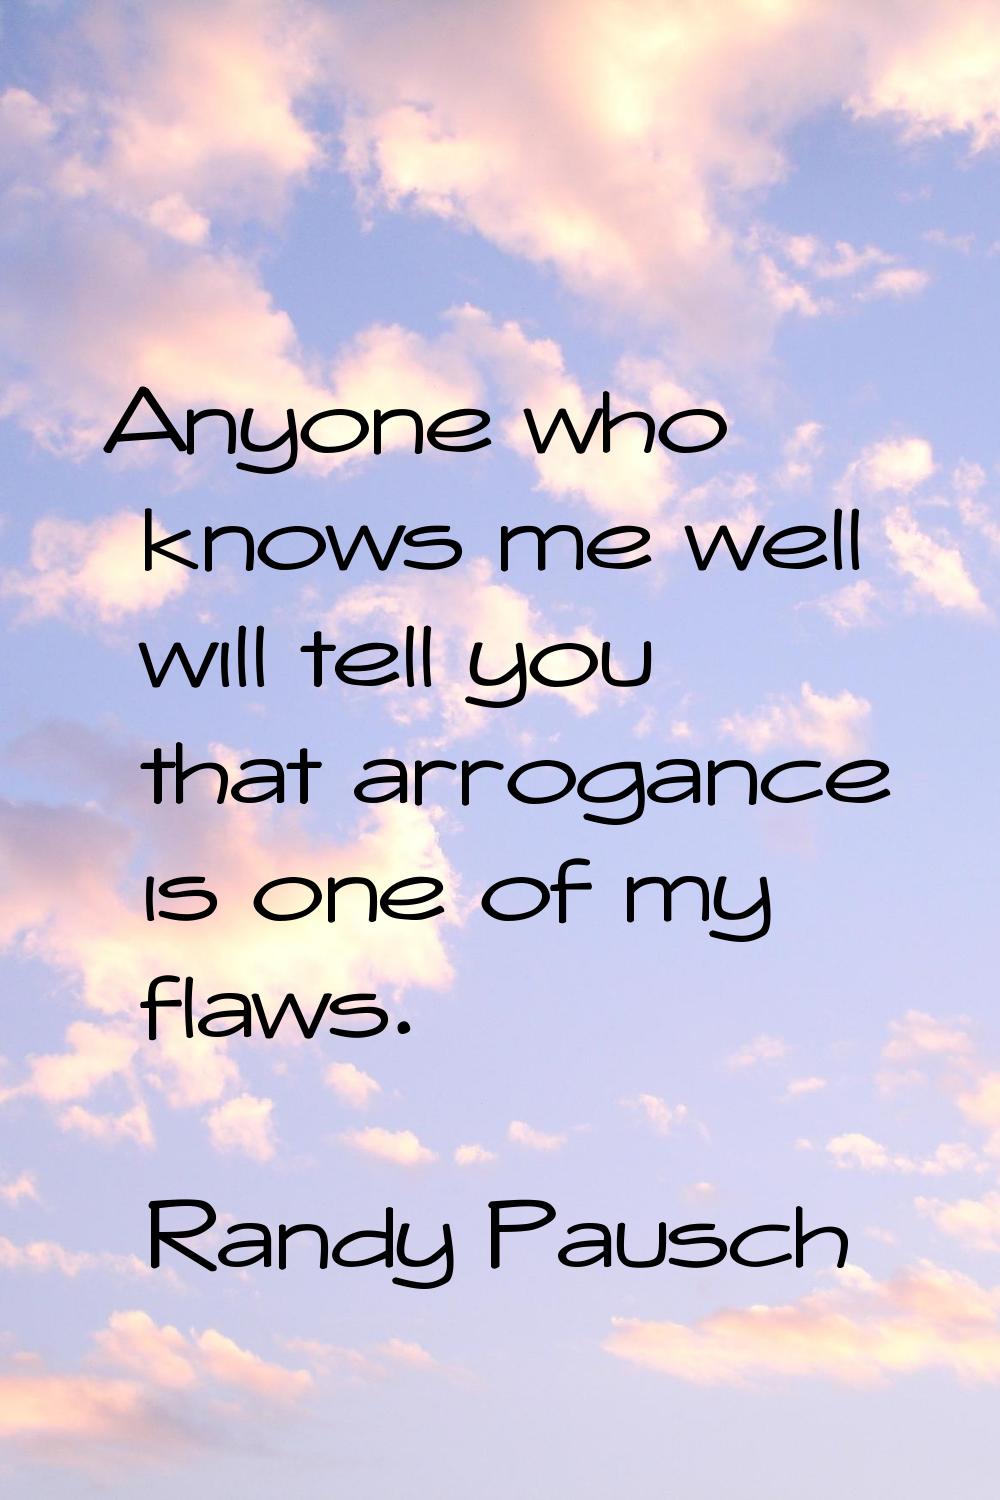 Anyone who knows me well will tell you that arrogance is one of my flaws.